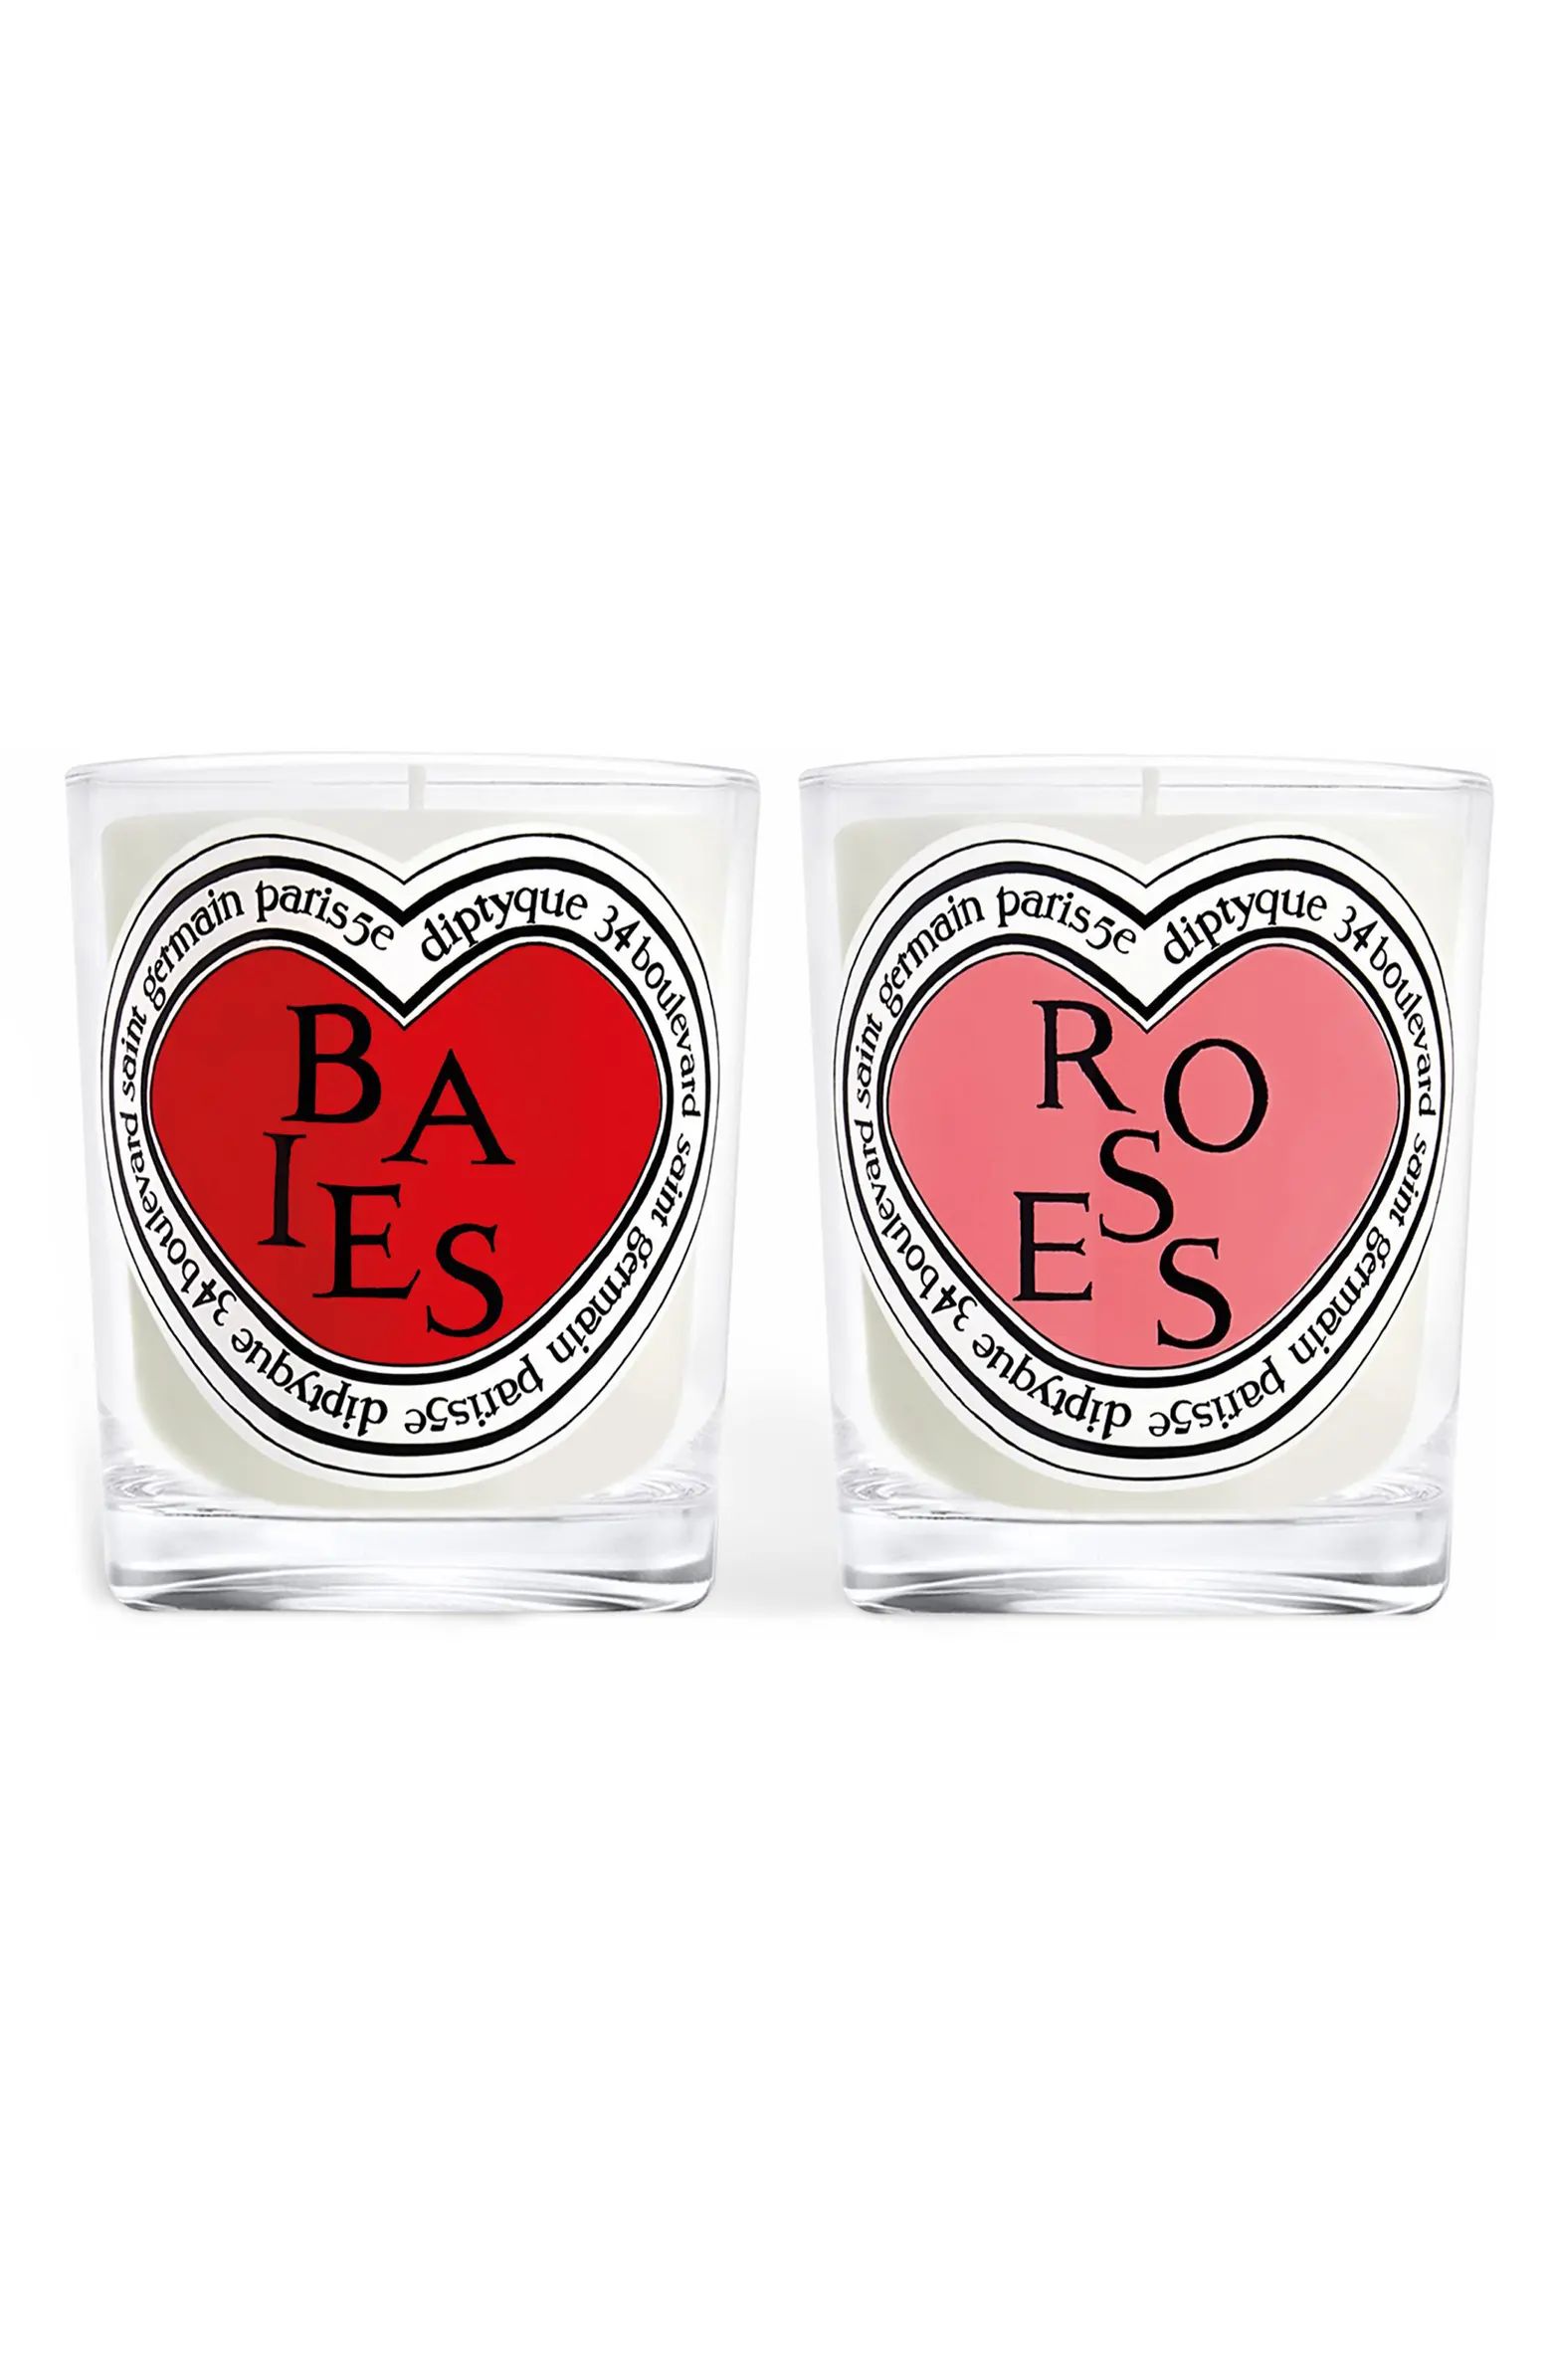 Valentine's Day Baies (Berries) and Roses Candle Duo | Nordstrom